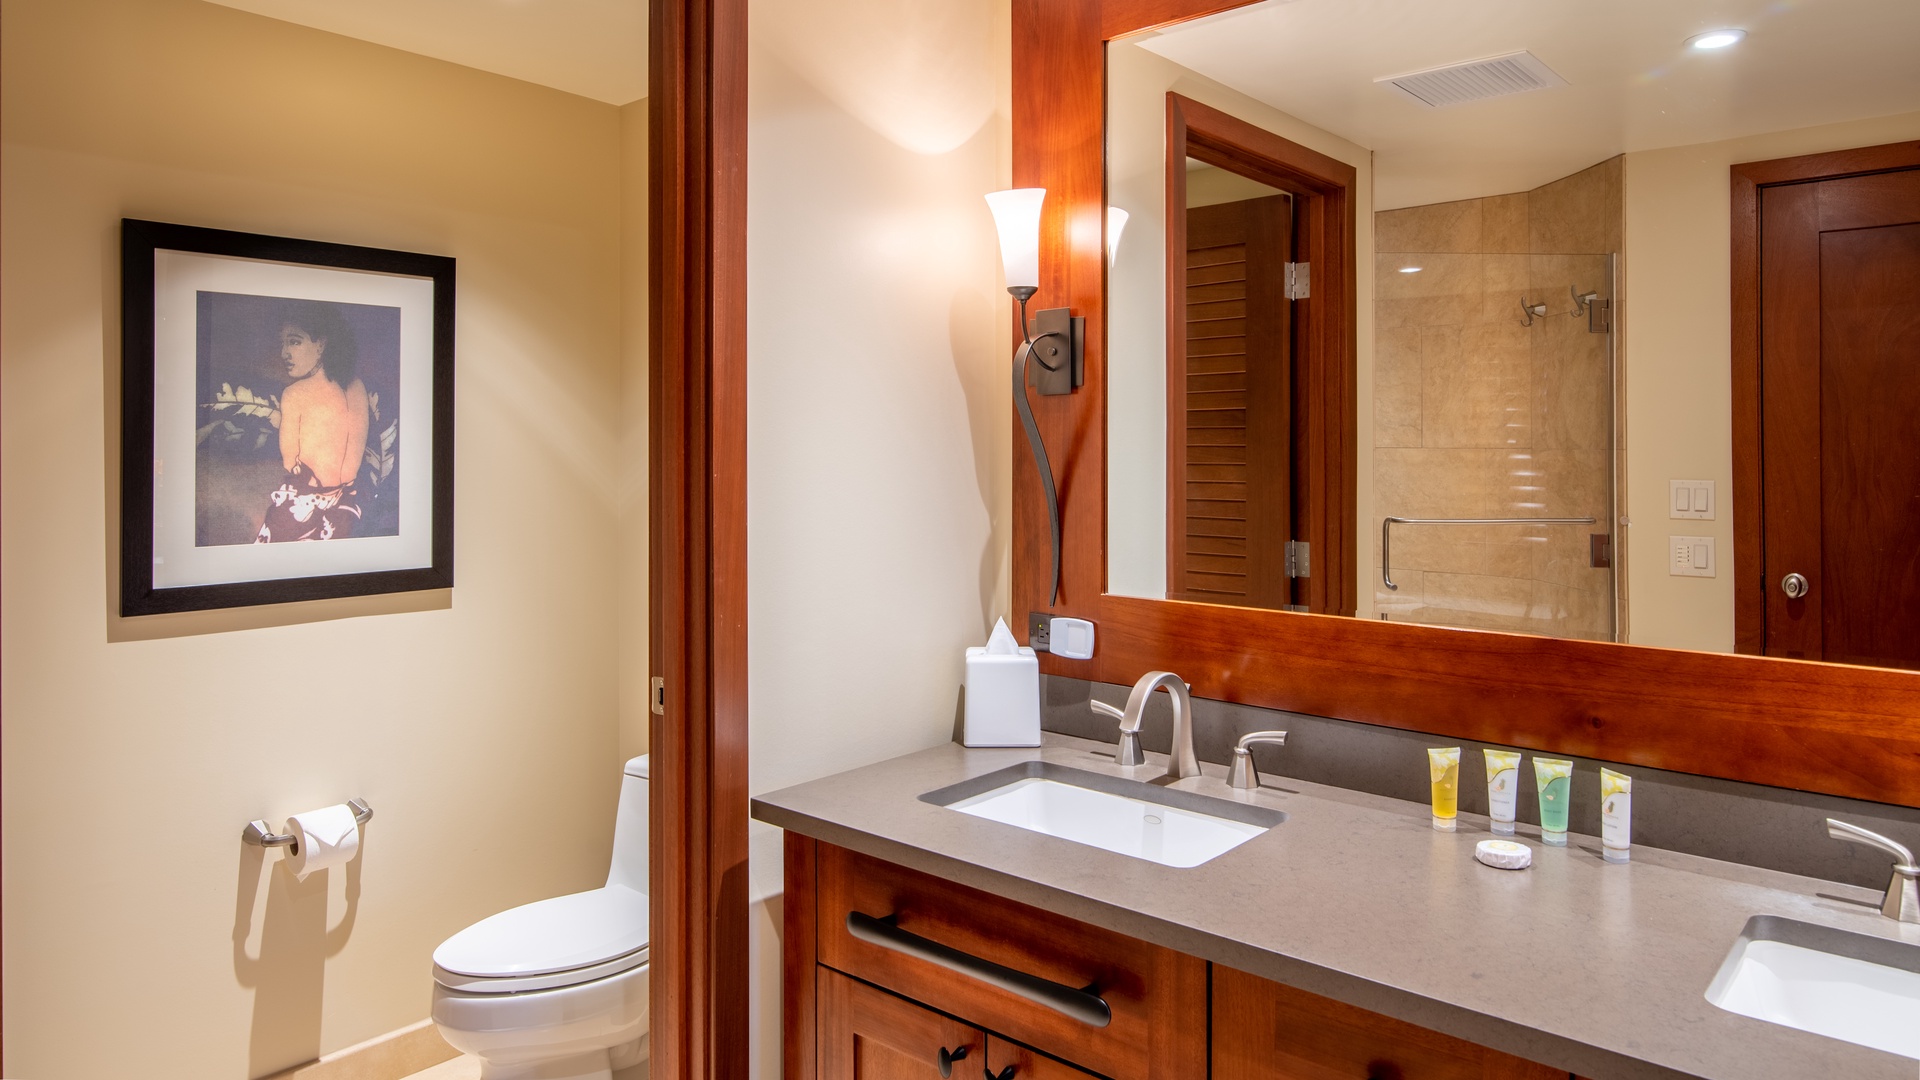 Kapolei Vacation Rentals, Ko Olina Beach Villas B901 - The primary guest bathroom has a double vanity and walk-in shower.